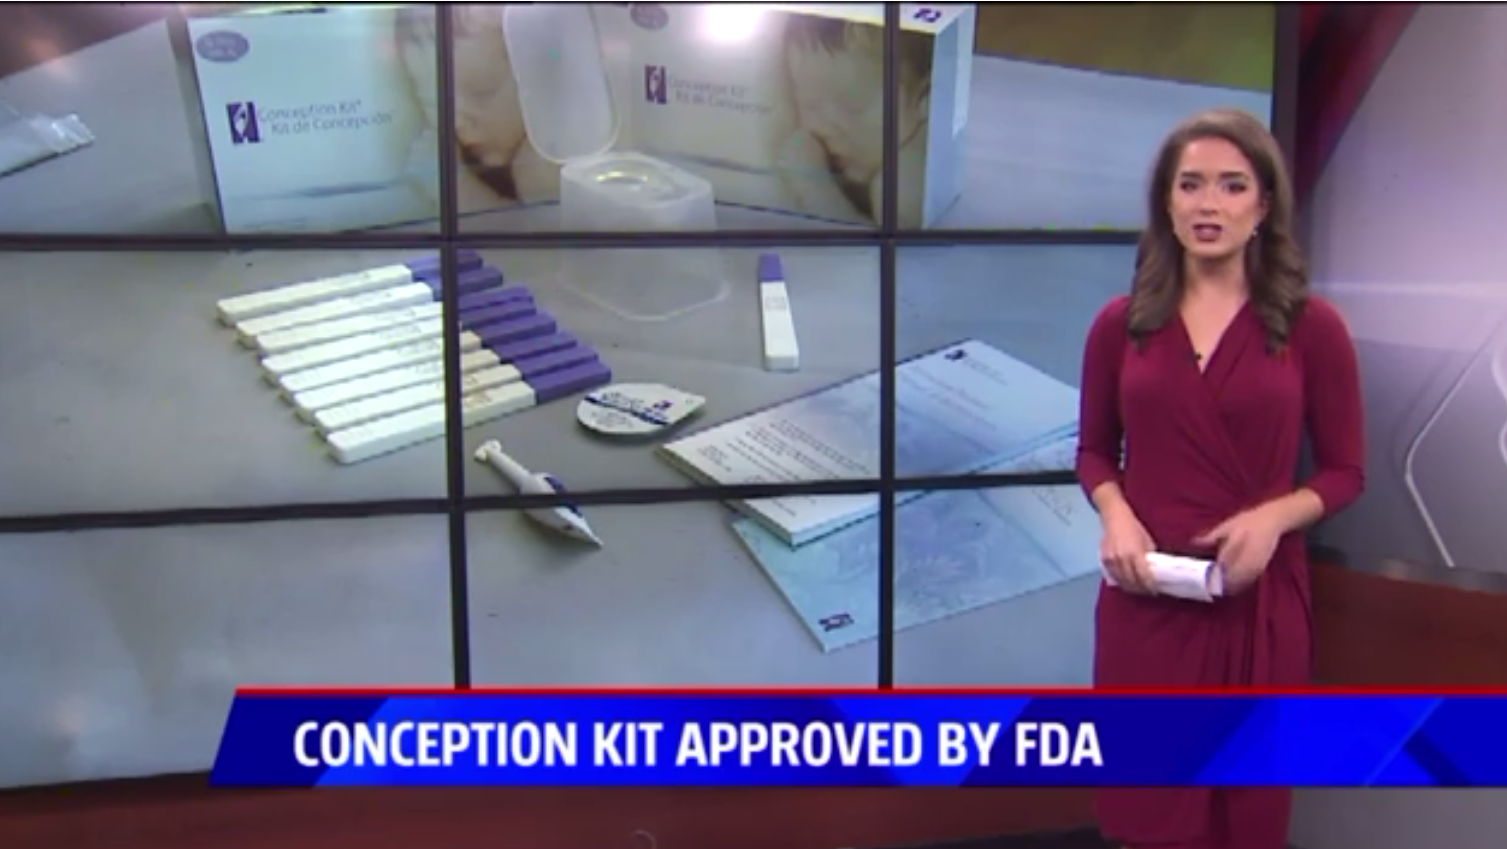 FDA approved take-home kit helps couples conceive